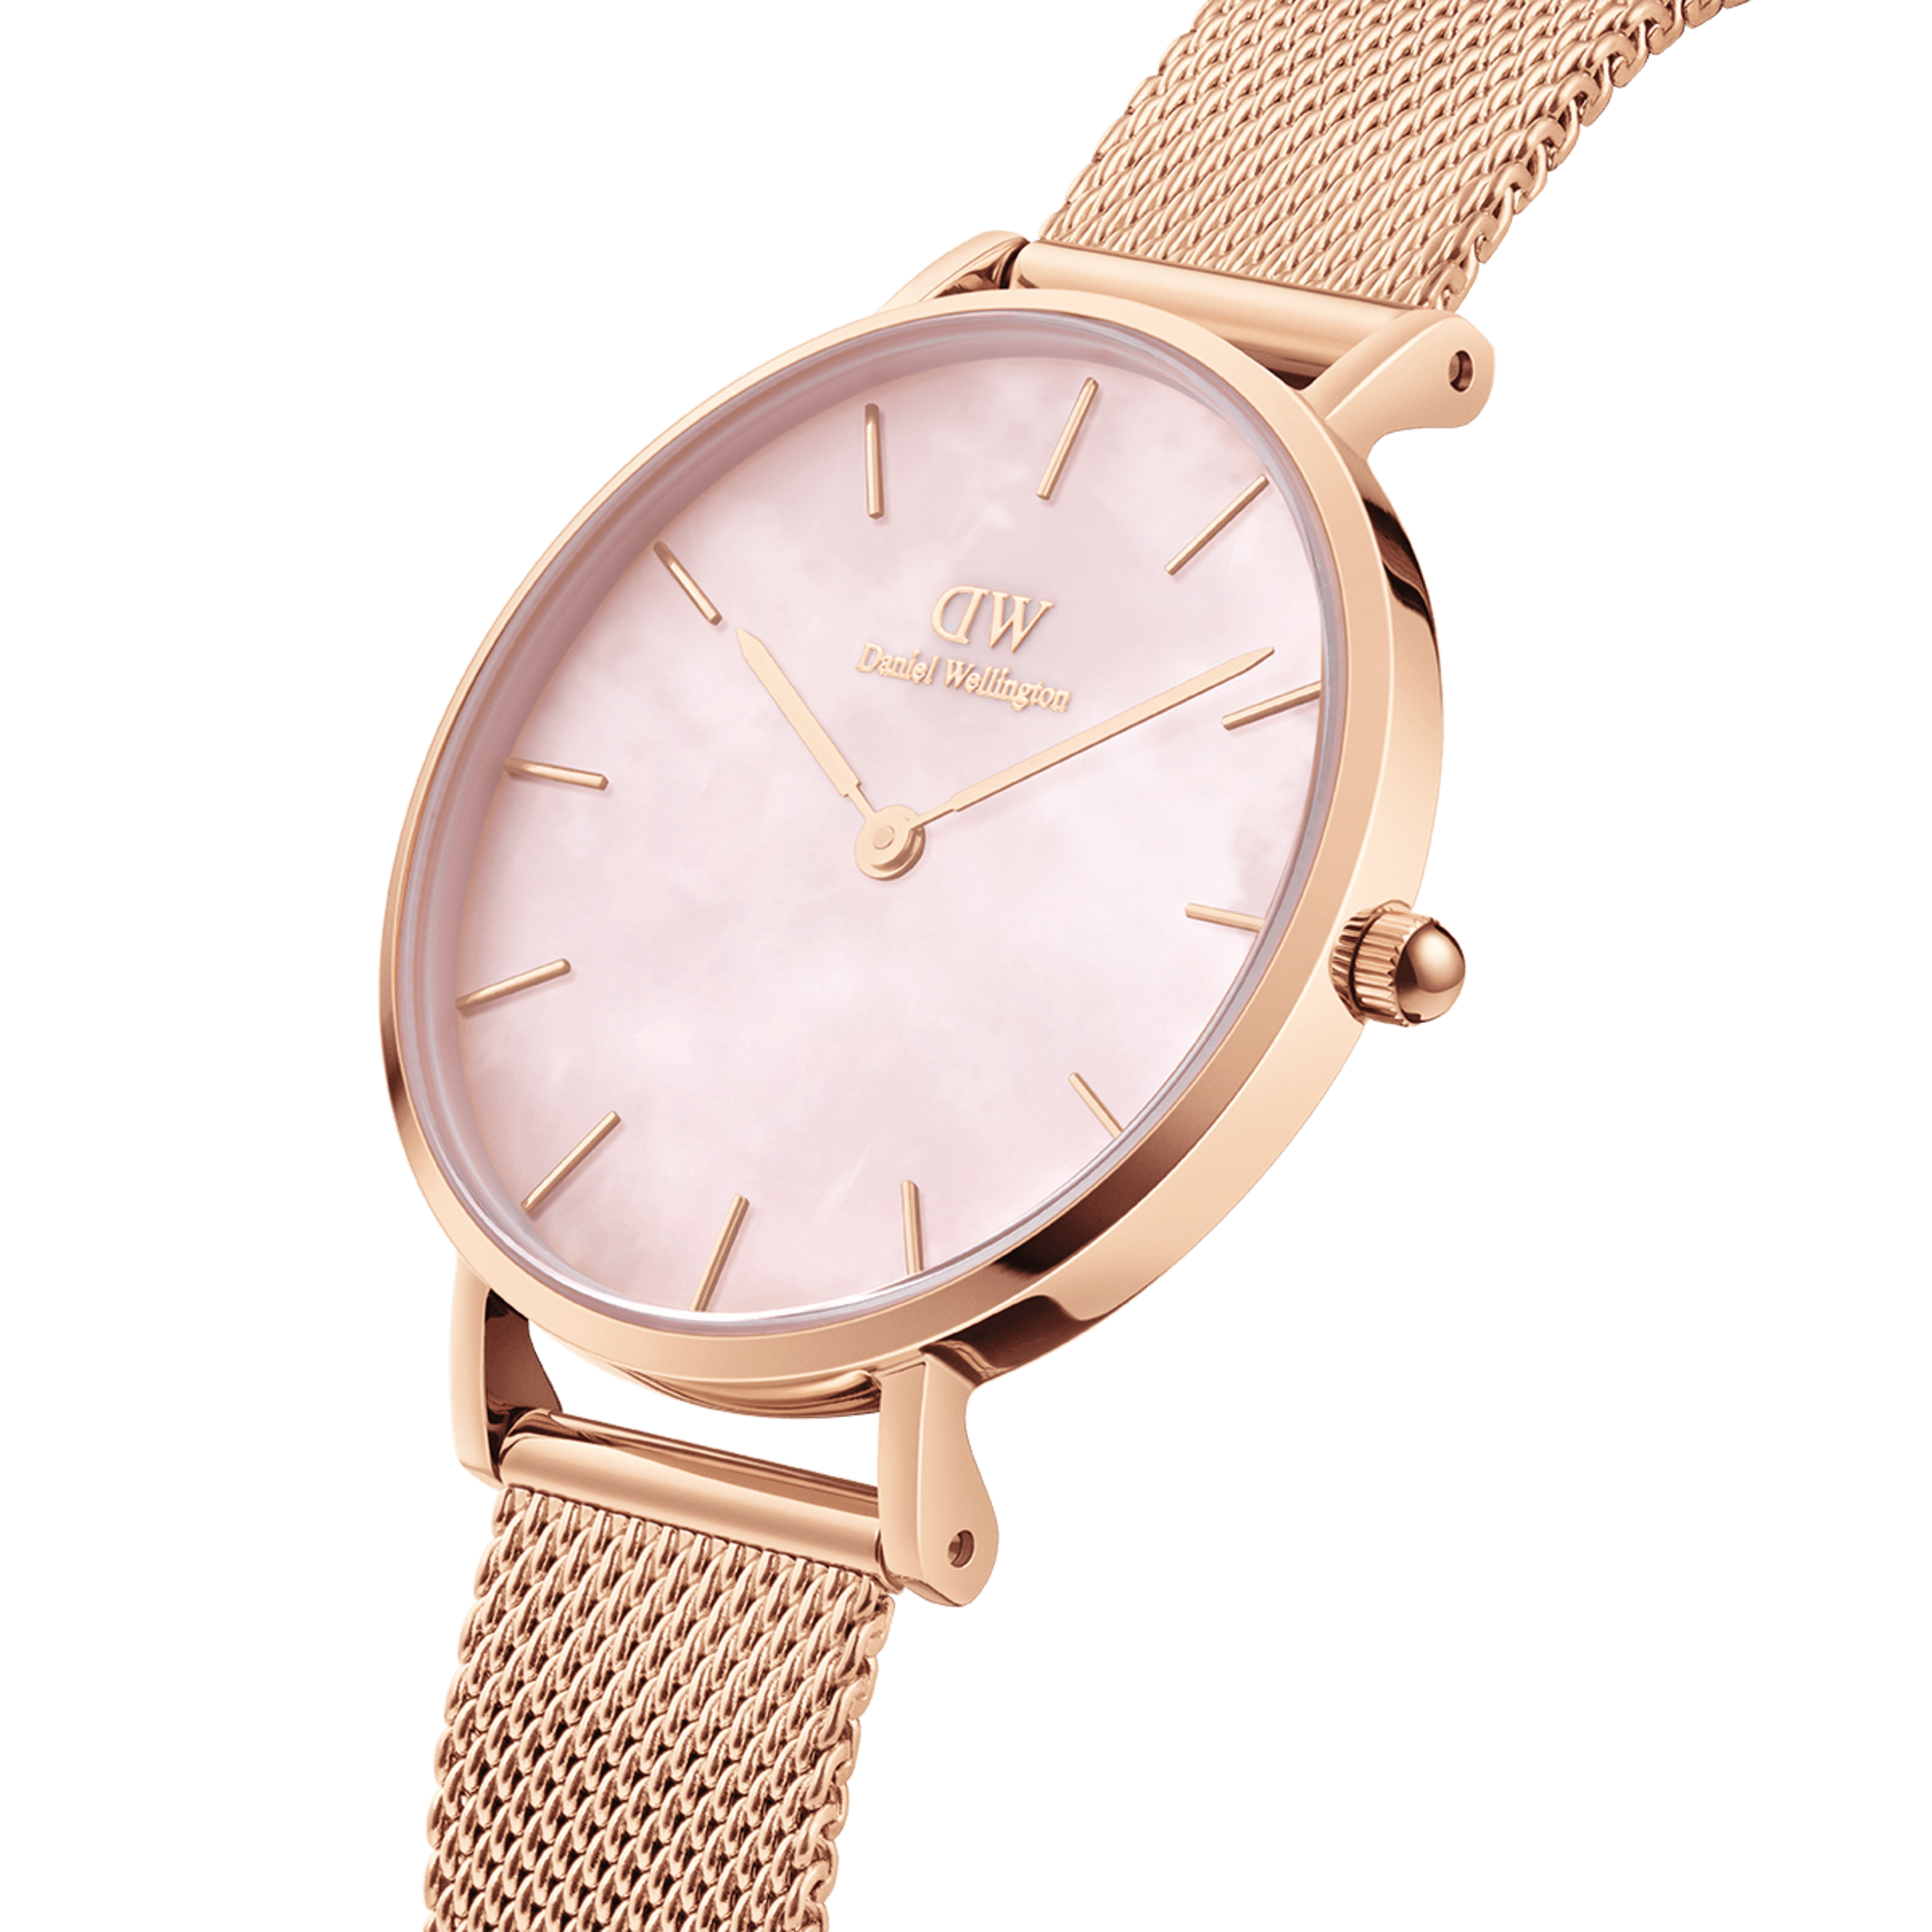 Channel sophistication and grace with these mother-of-pearl watches